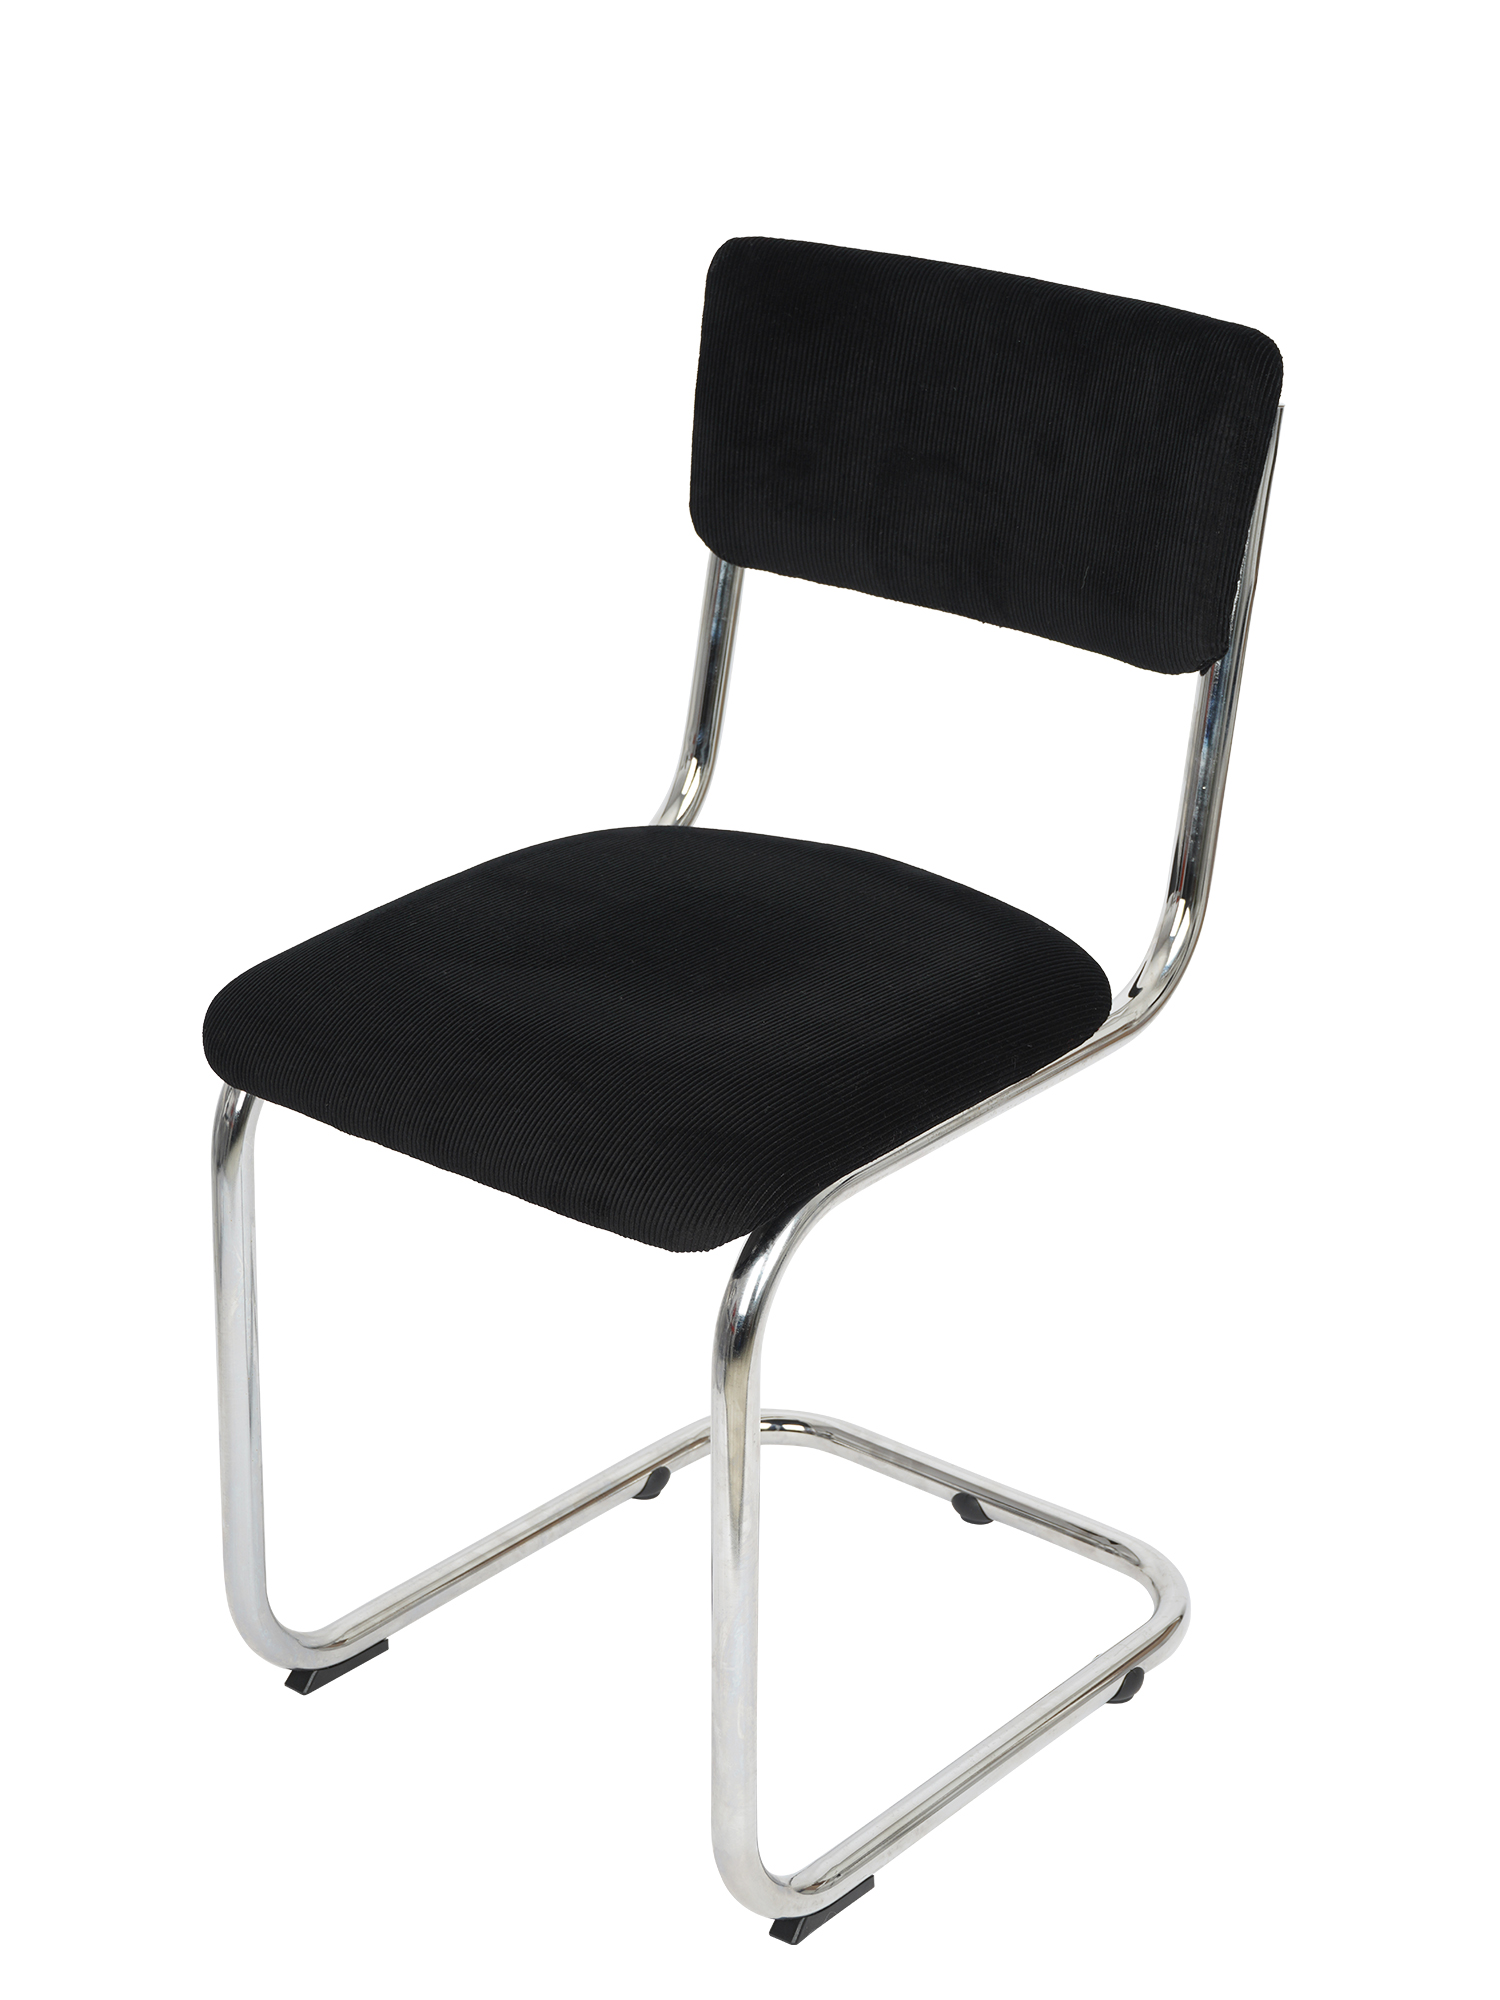 [TUBAX] Cantilever Side Chair Manchester Black